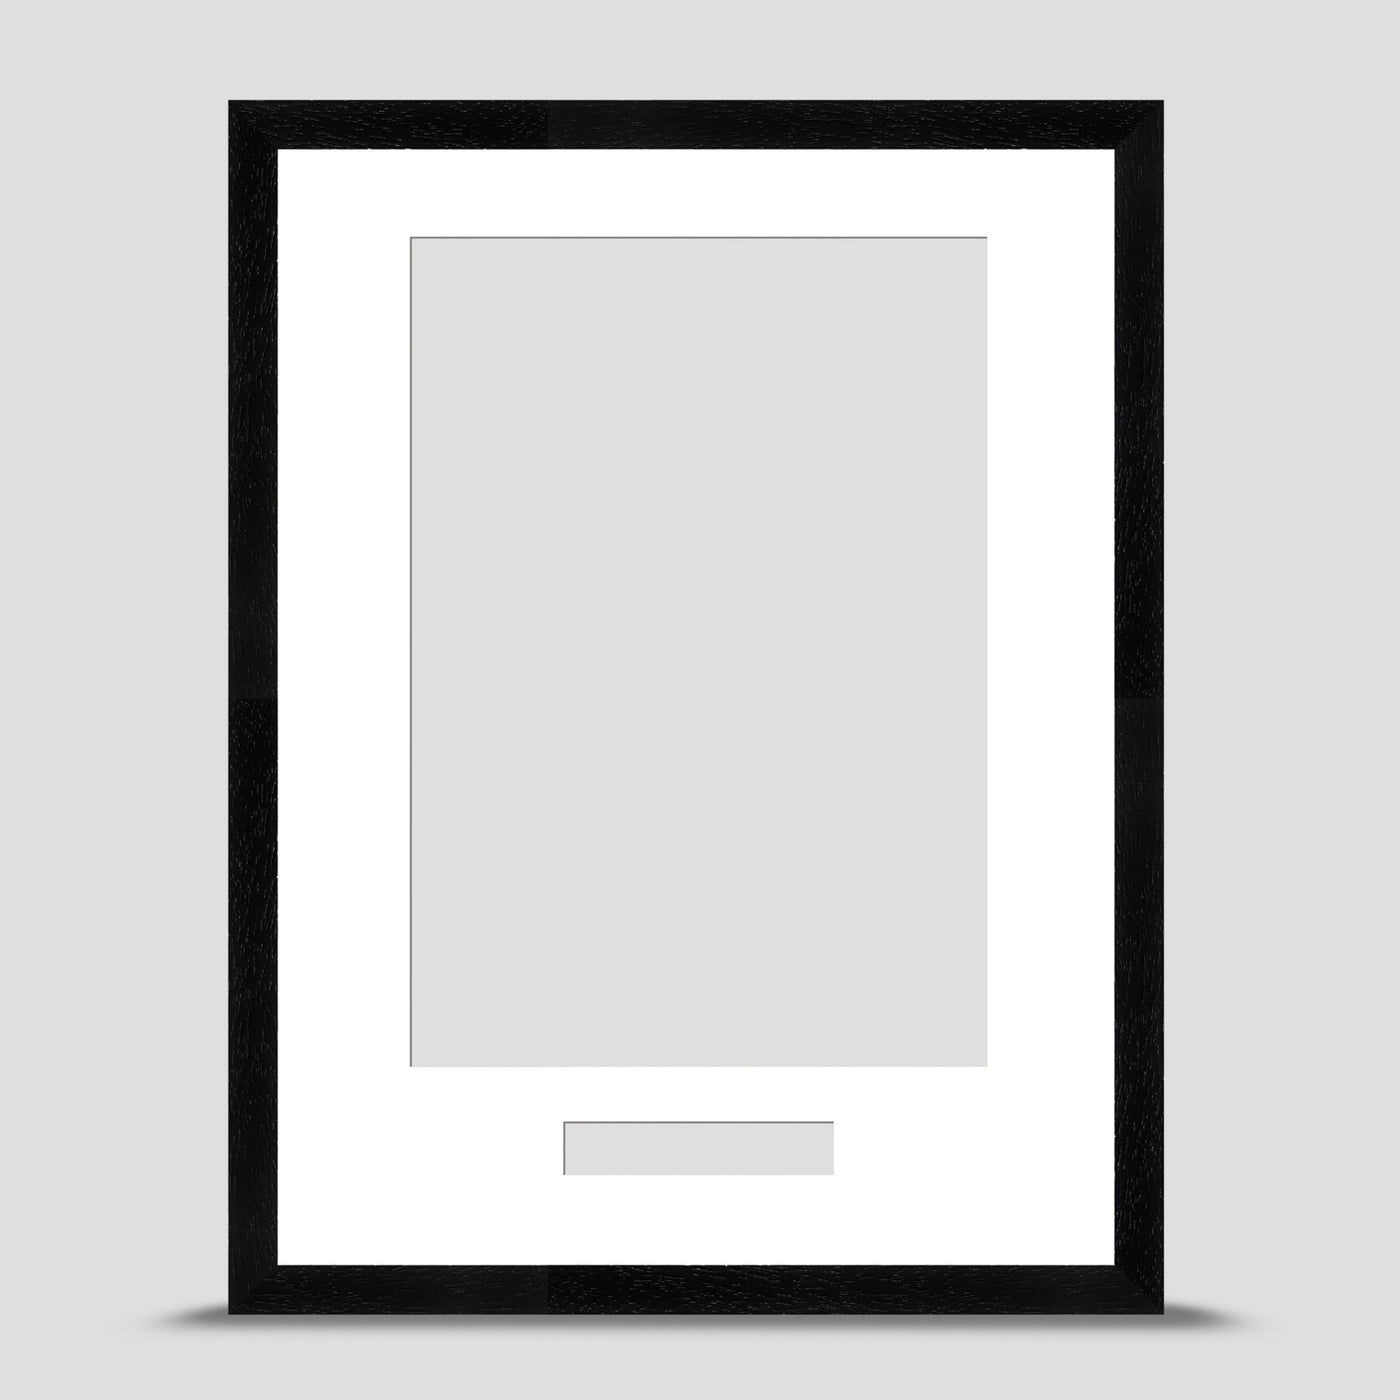 16x12 Classic Black Picture Frame Including a A4 Mount with text box - Portrait